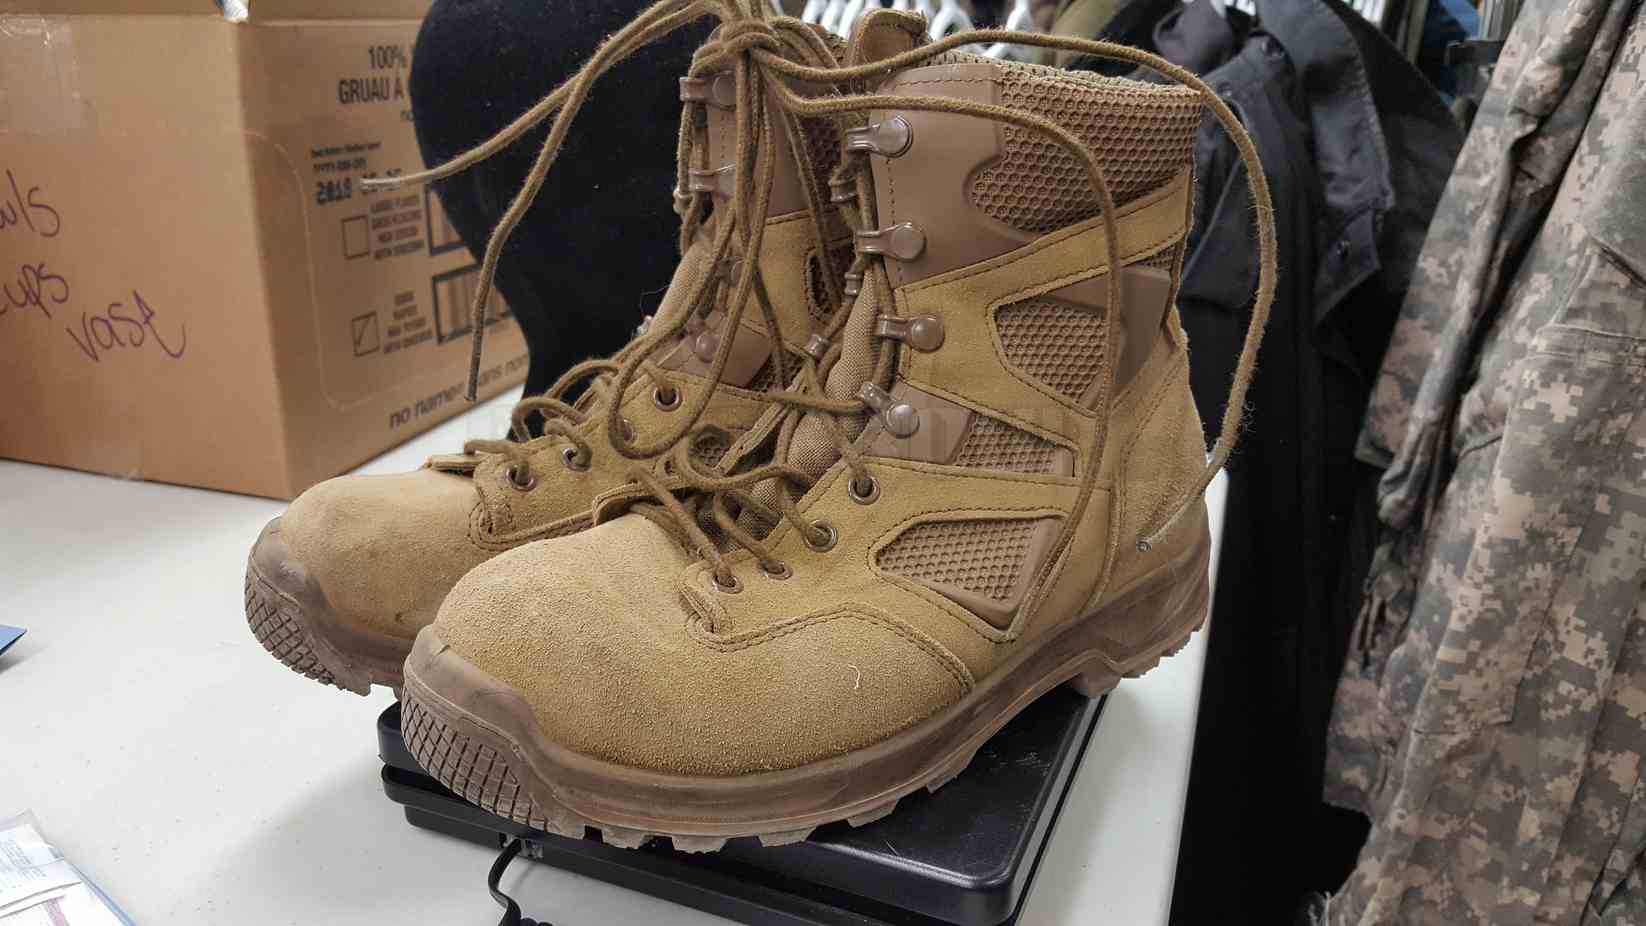 Terra Army Boots | peacecommission.kdsg.gov.ng